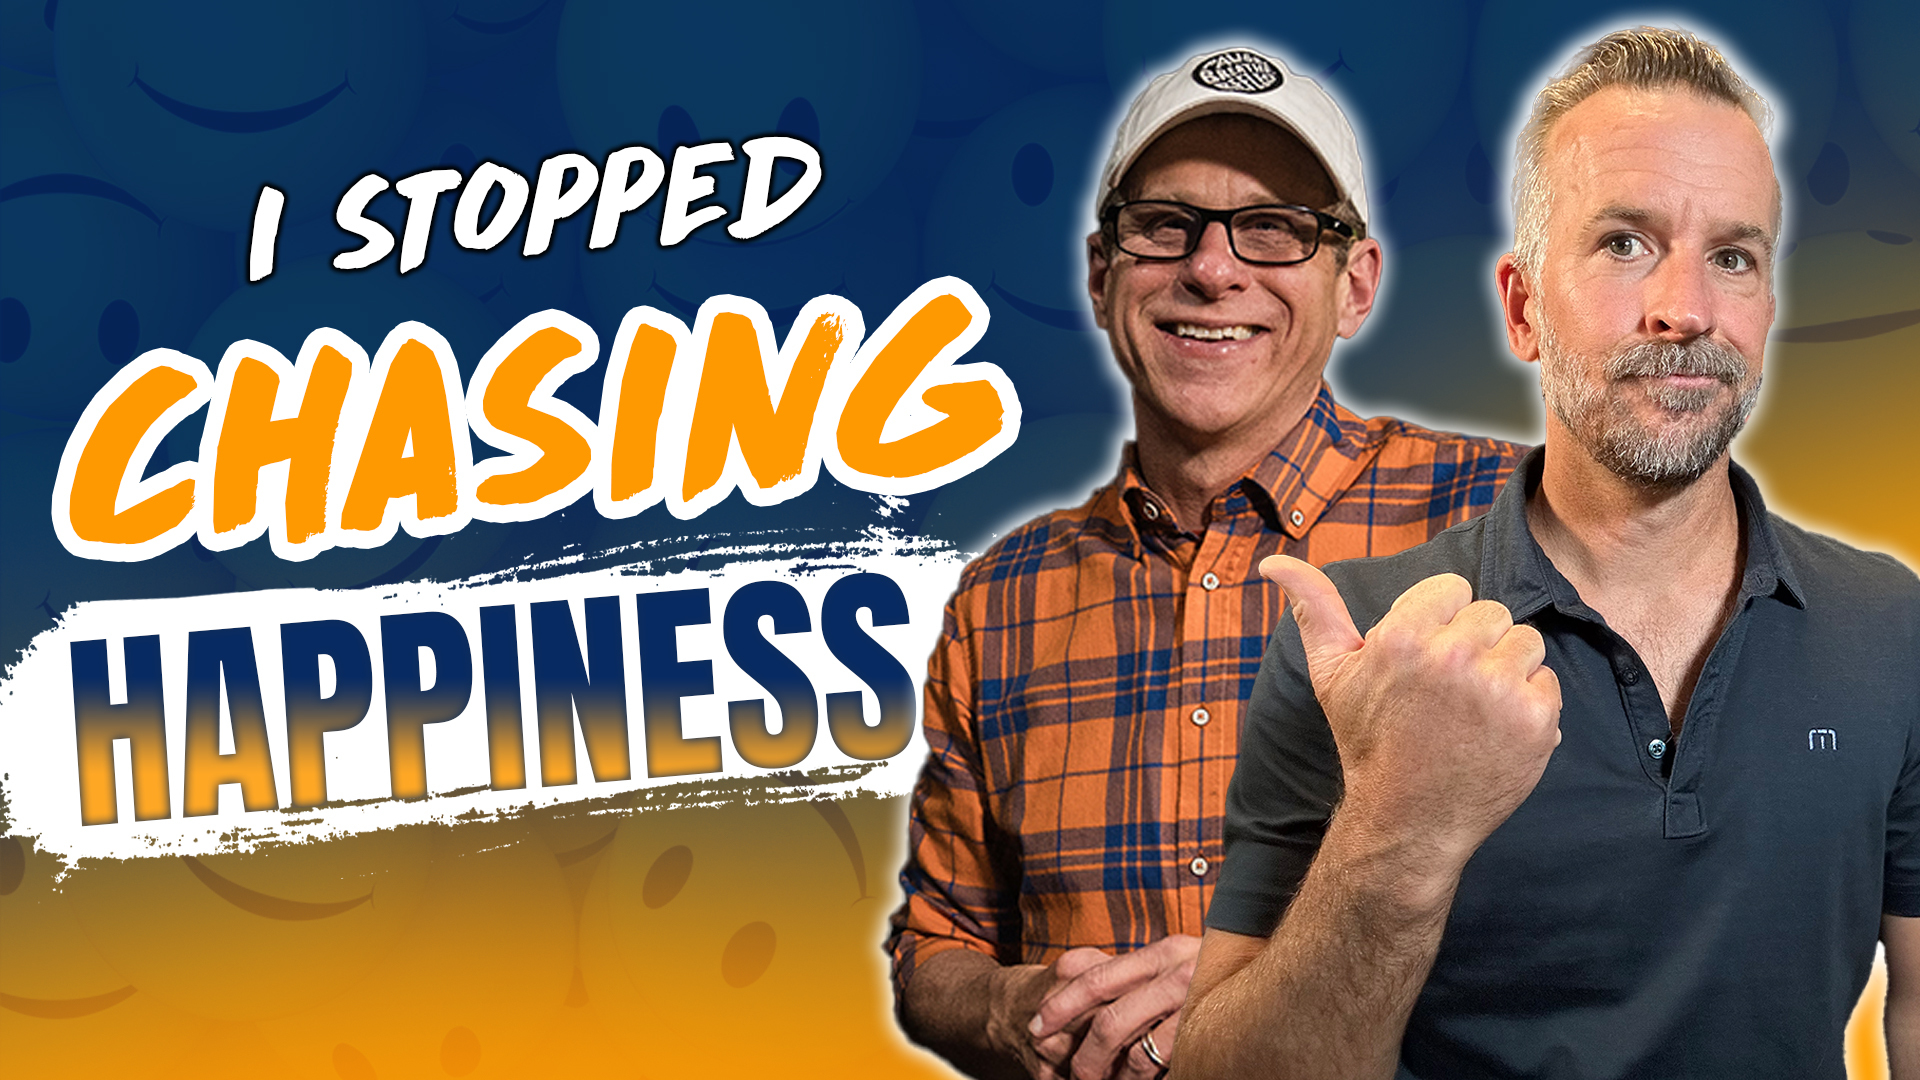 Flow Over Fear: I Stopped Chasing Happiness